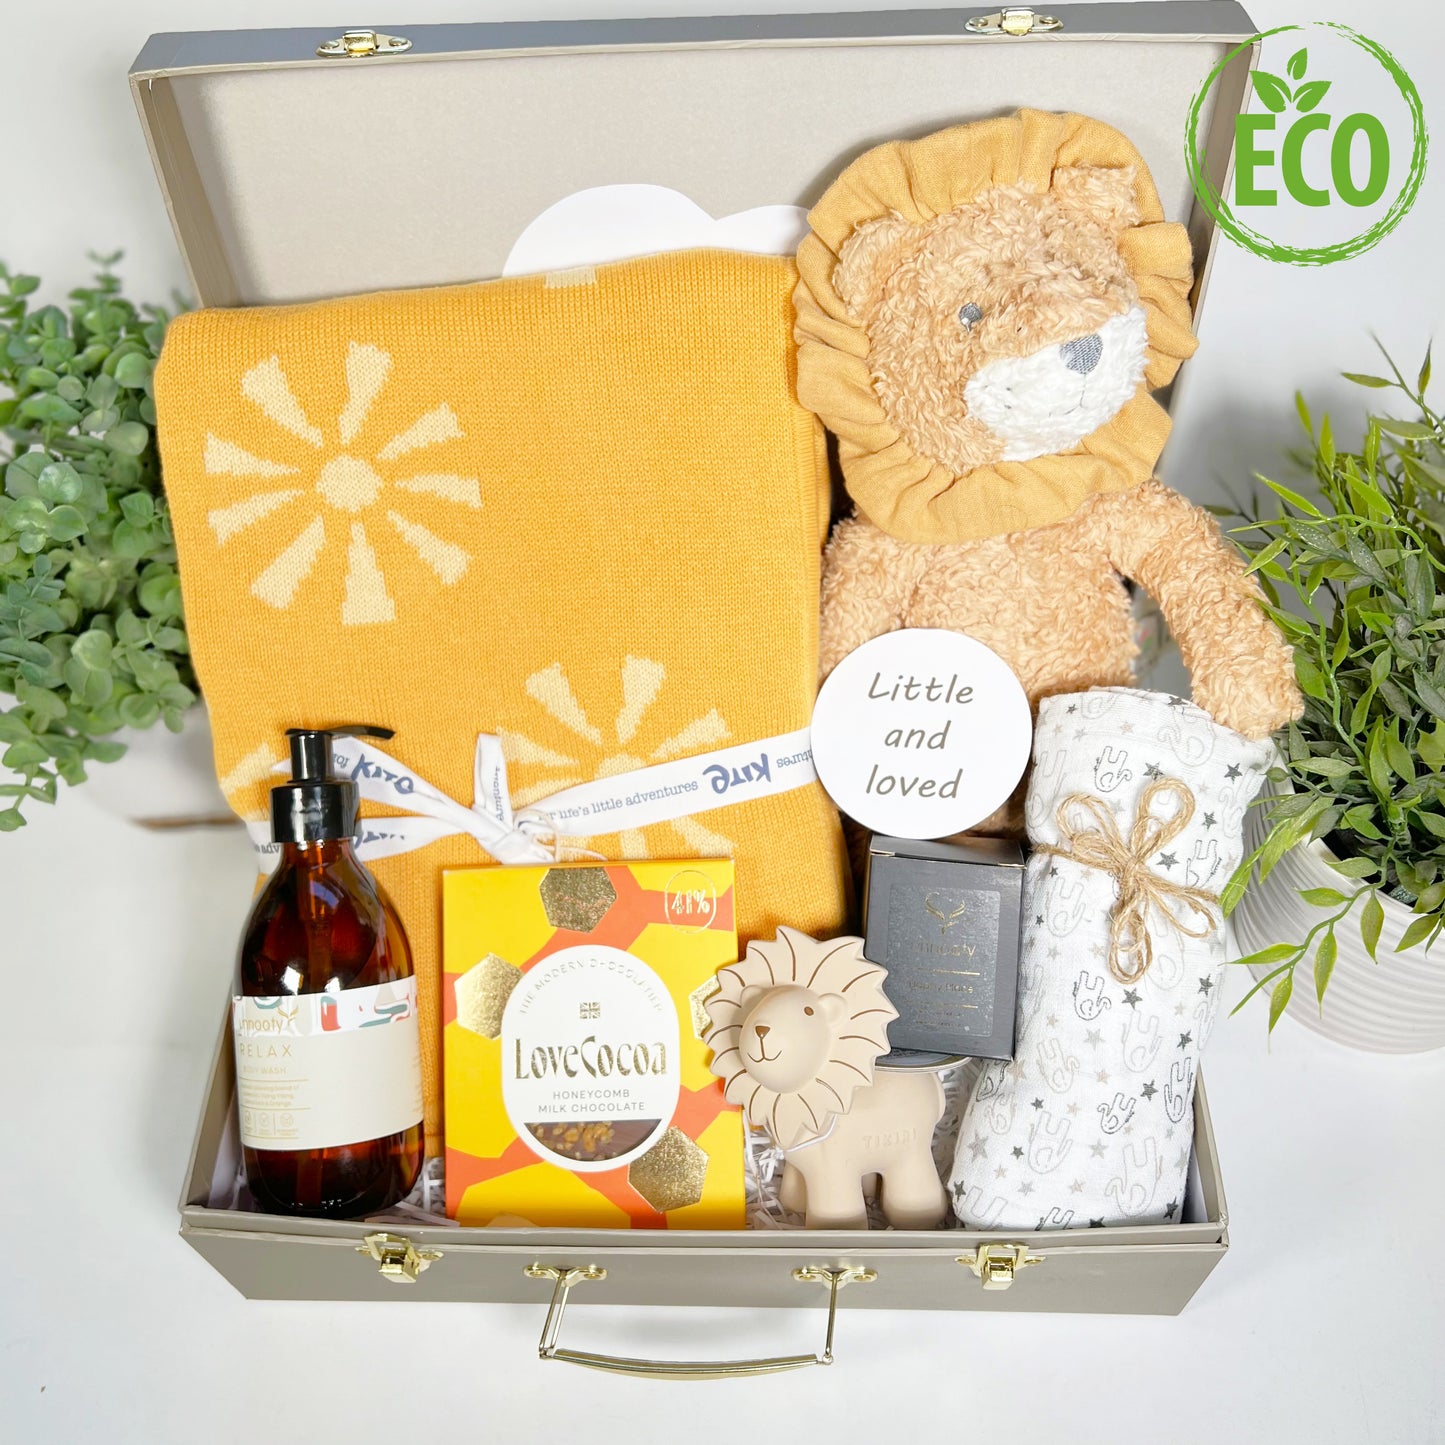 A Baby Keepsake case with eco frindly contents to include a lionel lion soft baby toy, a cotton baby blankey with sunshine knit, a natuarl rubber teething and bath toy lion, a elephant print  muslin square , anautral essentail oils candle and shower gel, a bar of Loce Cocoa chocolate and a reversible baby photography disc.